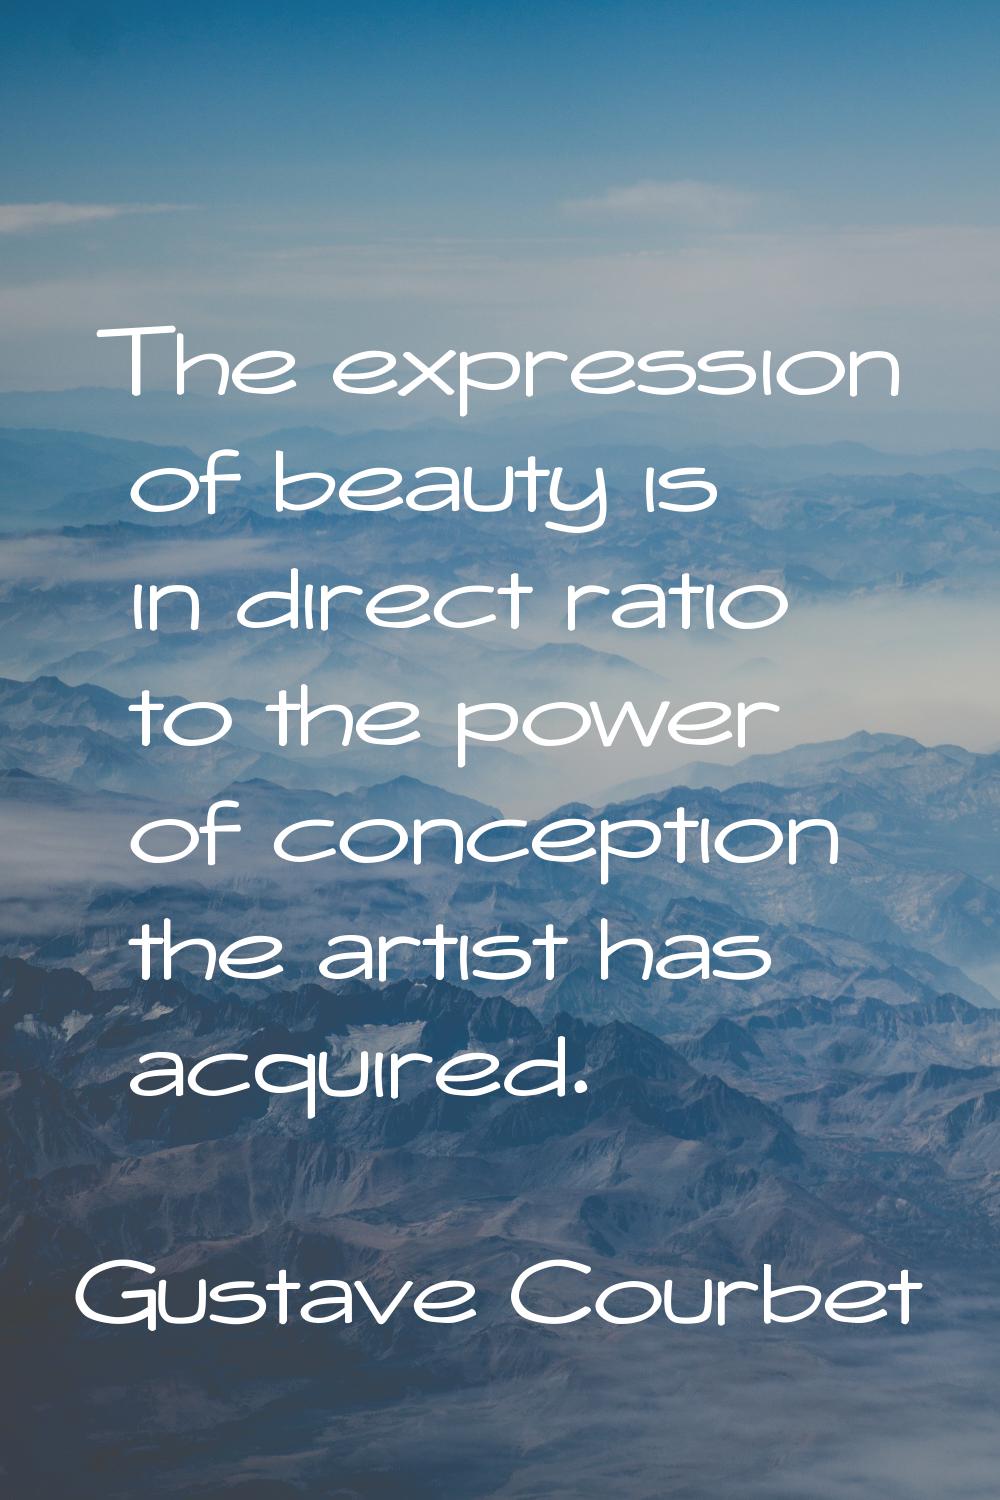 The expression of beauty is in direct ratio to the power of conception the artist has acquired.